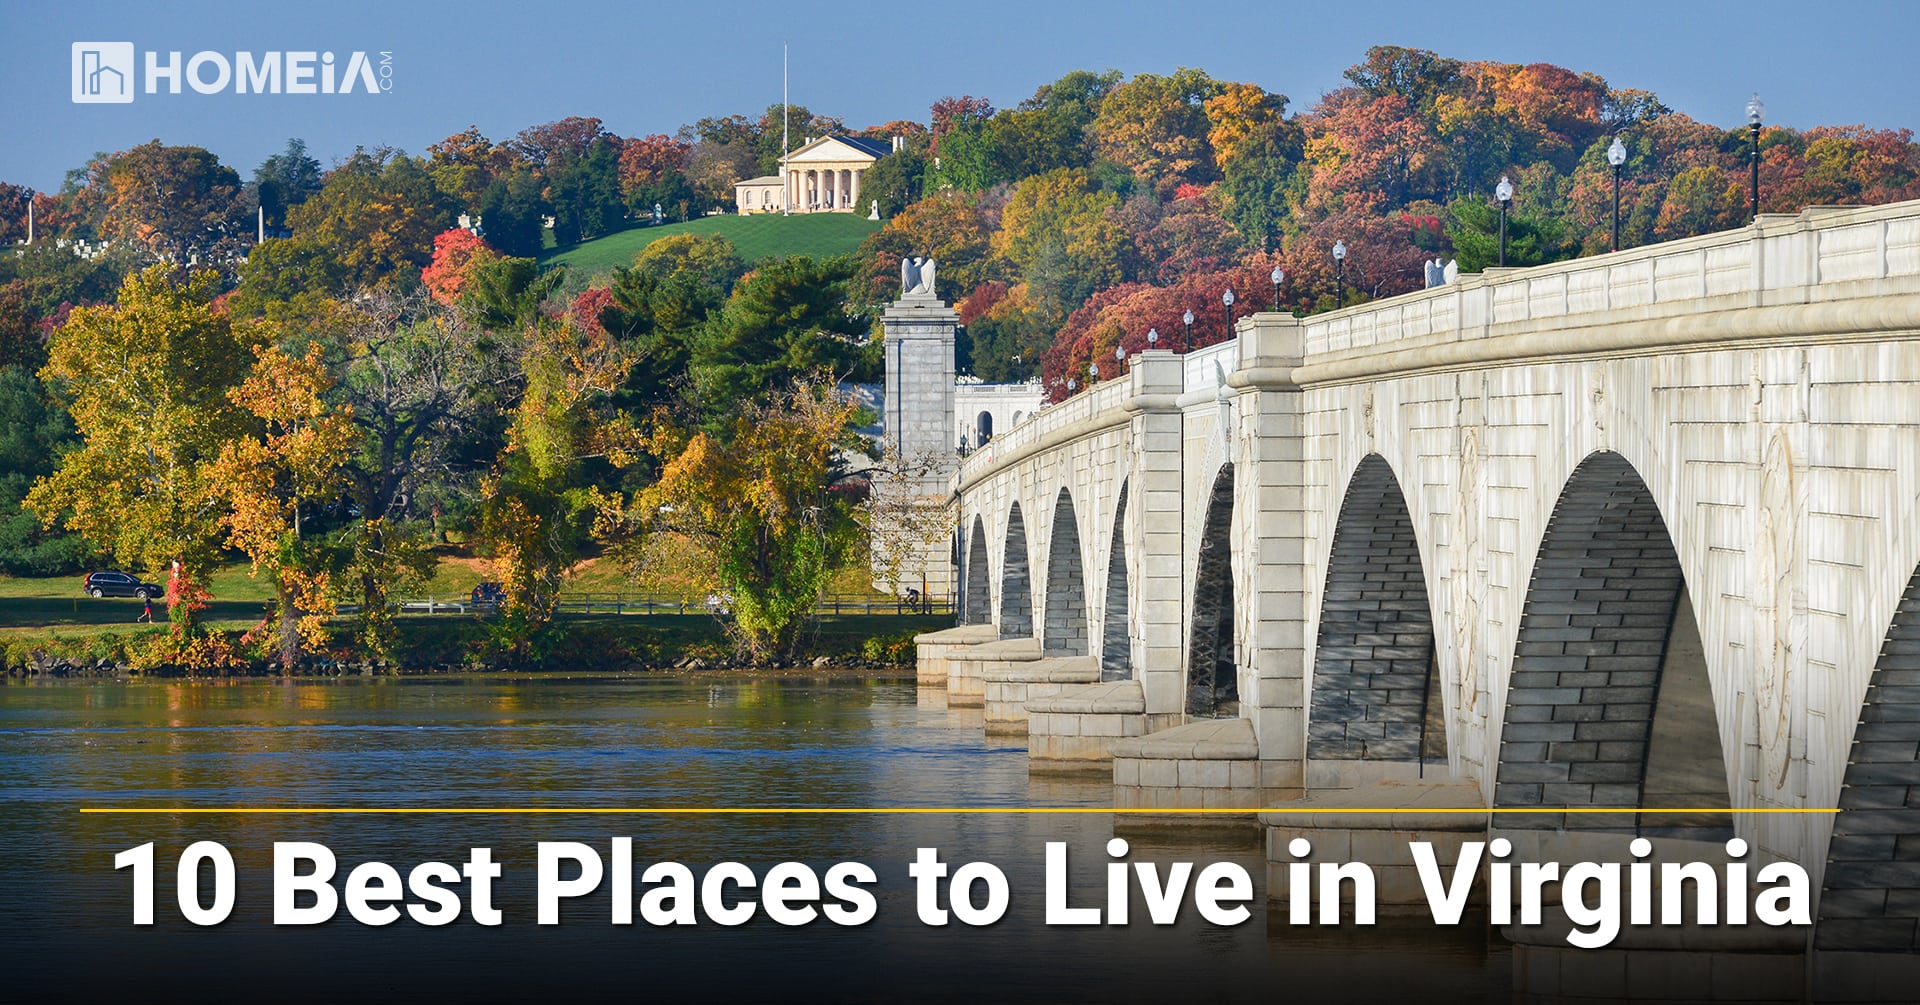 The 10 Best Places to Live in Virginia in 2022